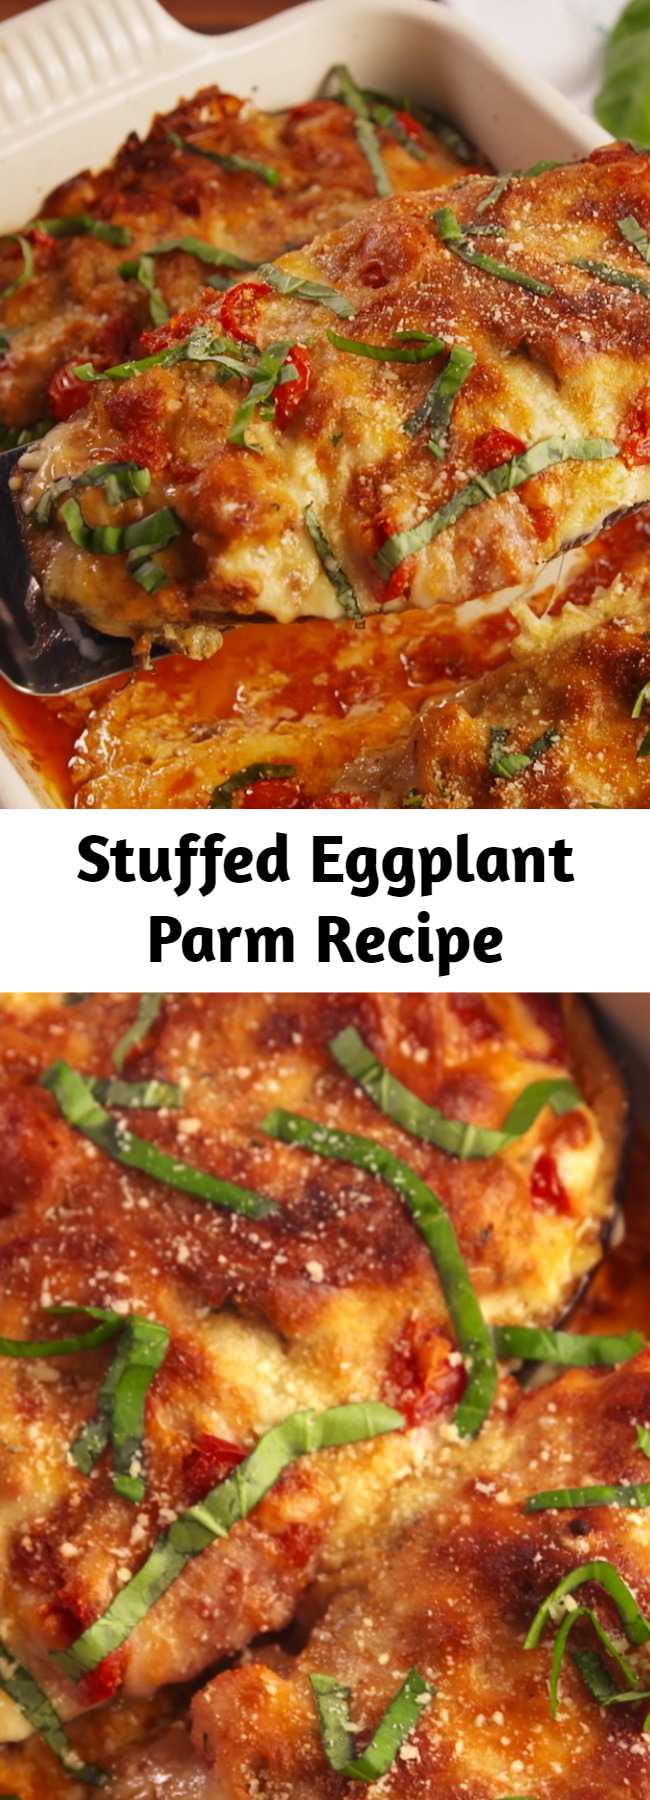 Stuffed Eggplant Parm Recipe - Stuffed Eggplant Parm is the low-carb dinner that will make you actually want to eat vegetables. You won't miss the pasta.